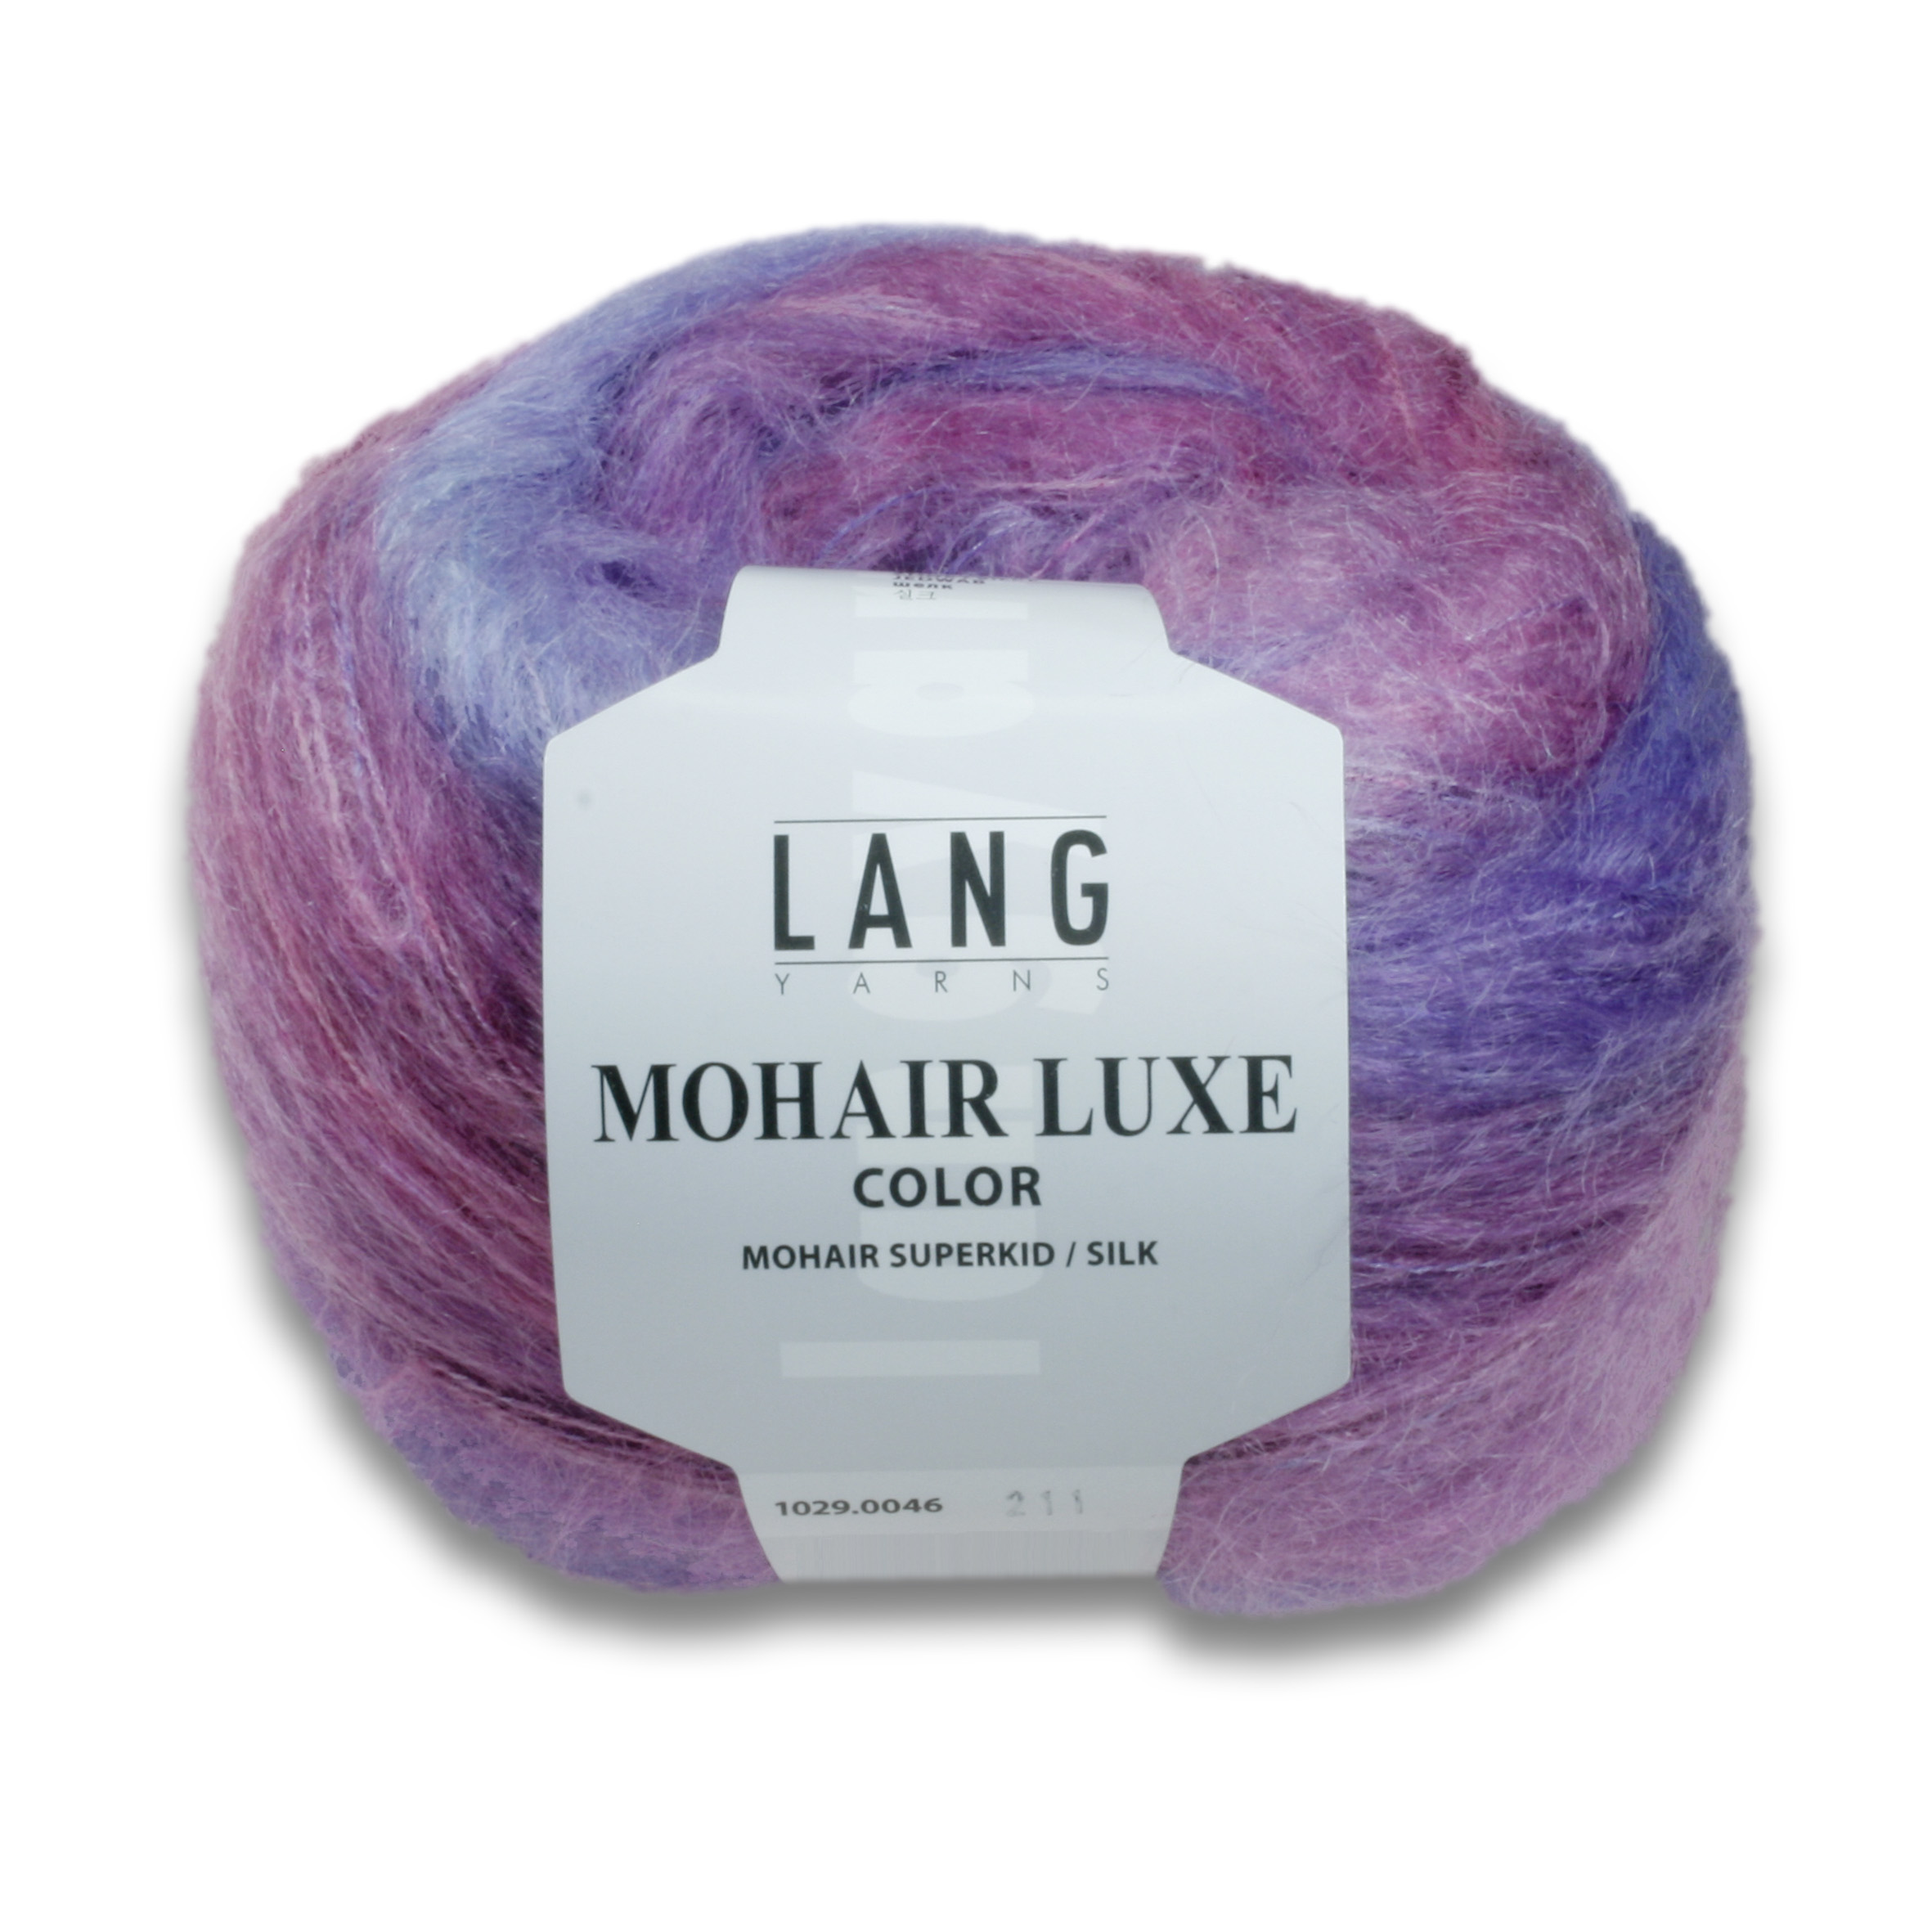 LANG Mohair Luxe Color